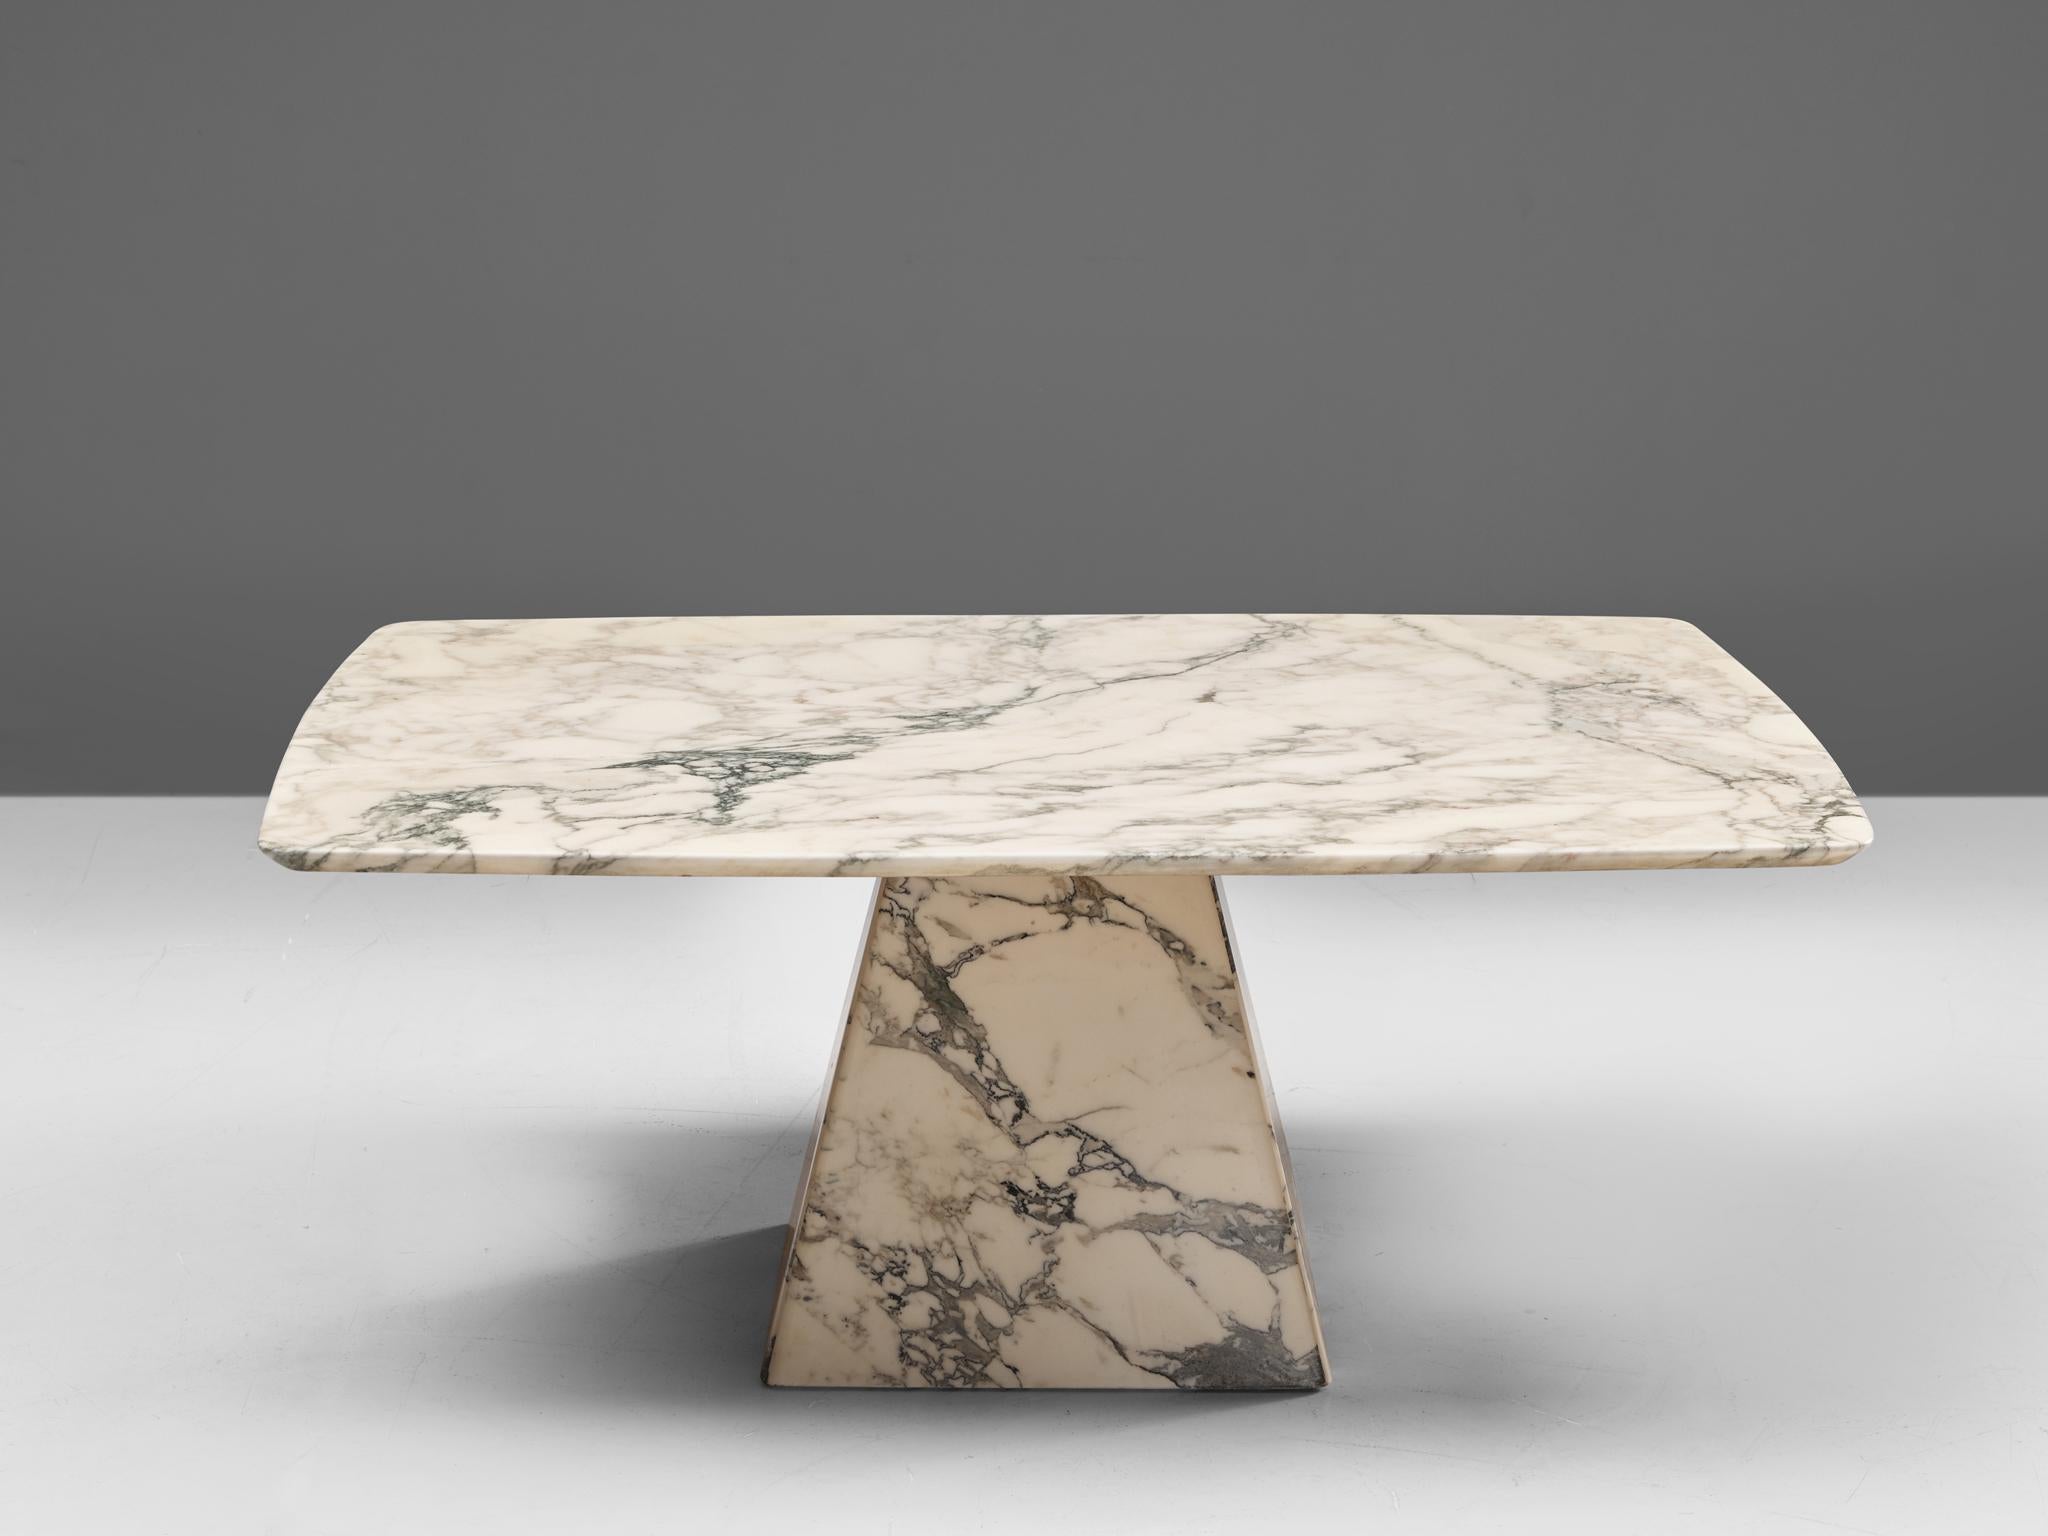 Coffee table, marble, Germany, 1980s

This square coffee table is a skillful example of Postmodern design. The top is square yet slightly curved. The base is pyraid shaped. The aesthetics are archetypical, bearing references to architectural forms